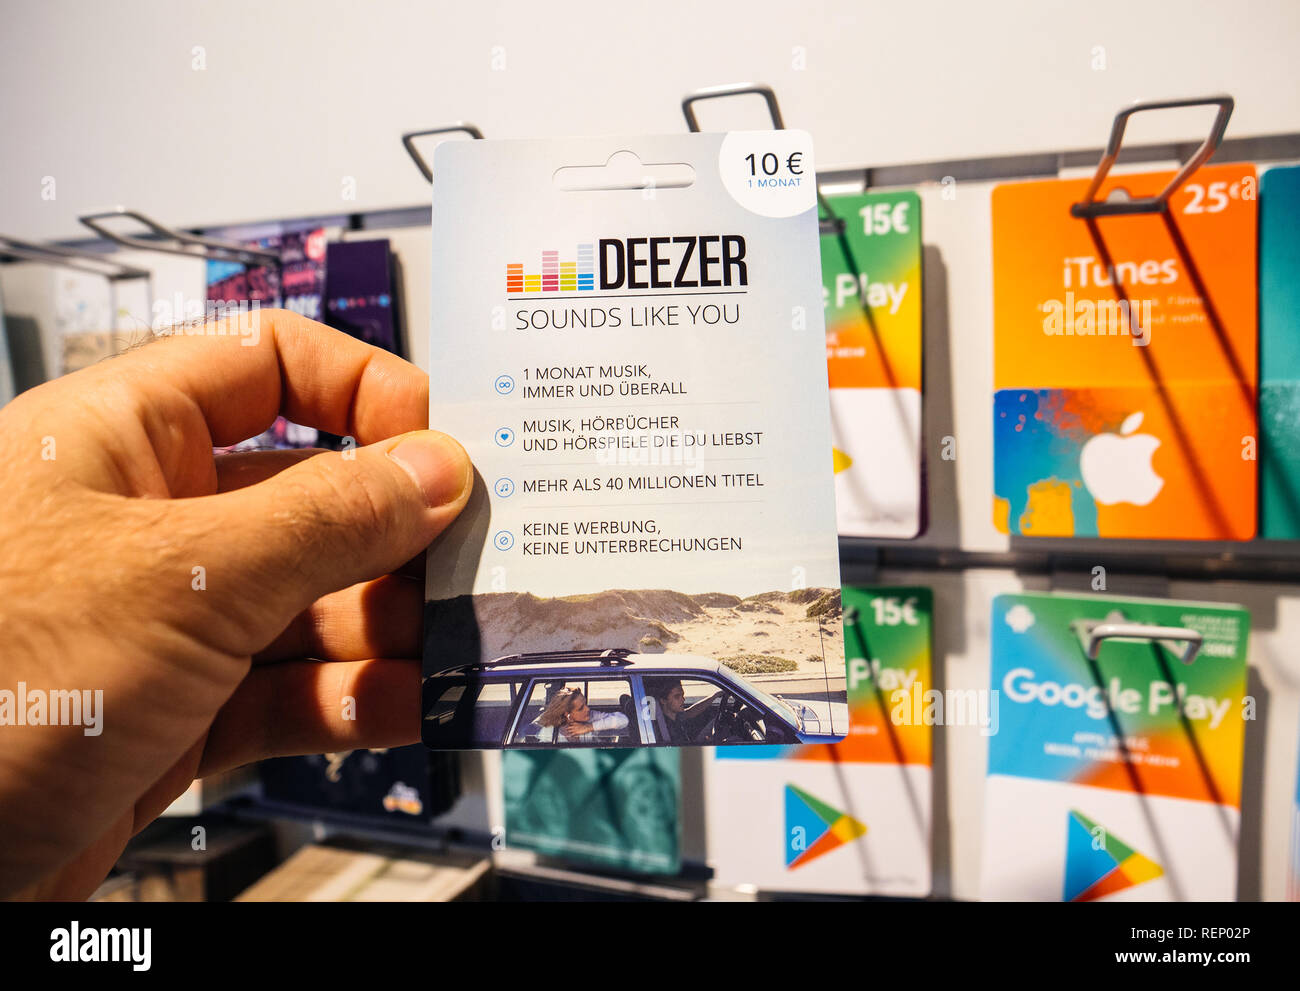 FRANKFURT, GERMANY - OCT 6, 2017: 50 Euro card in man hand point of view  customer shopping for prepaid Deezer Music Gift card online money prepaid  cards online music streaming Stock Photo - Alamy